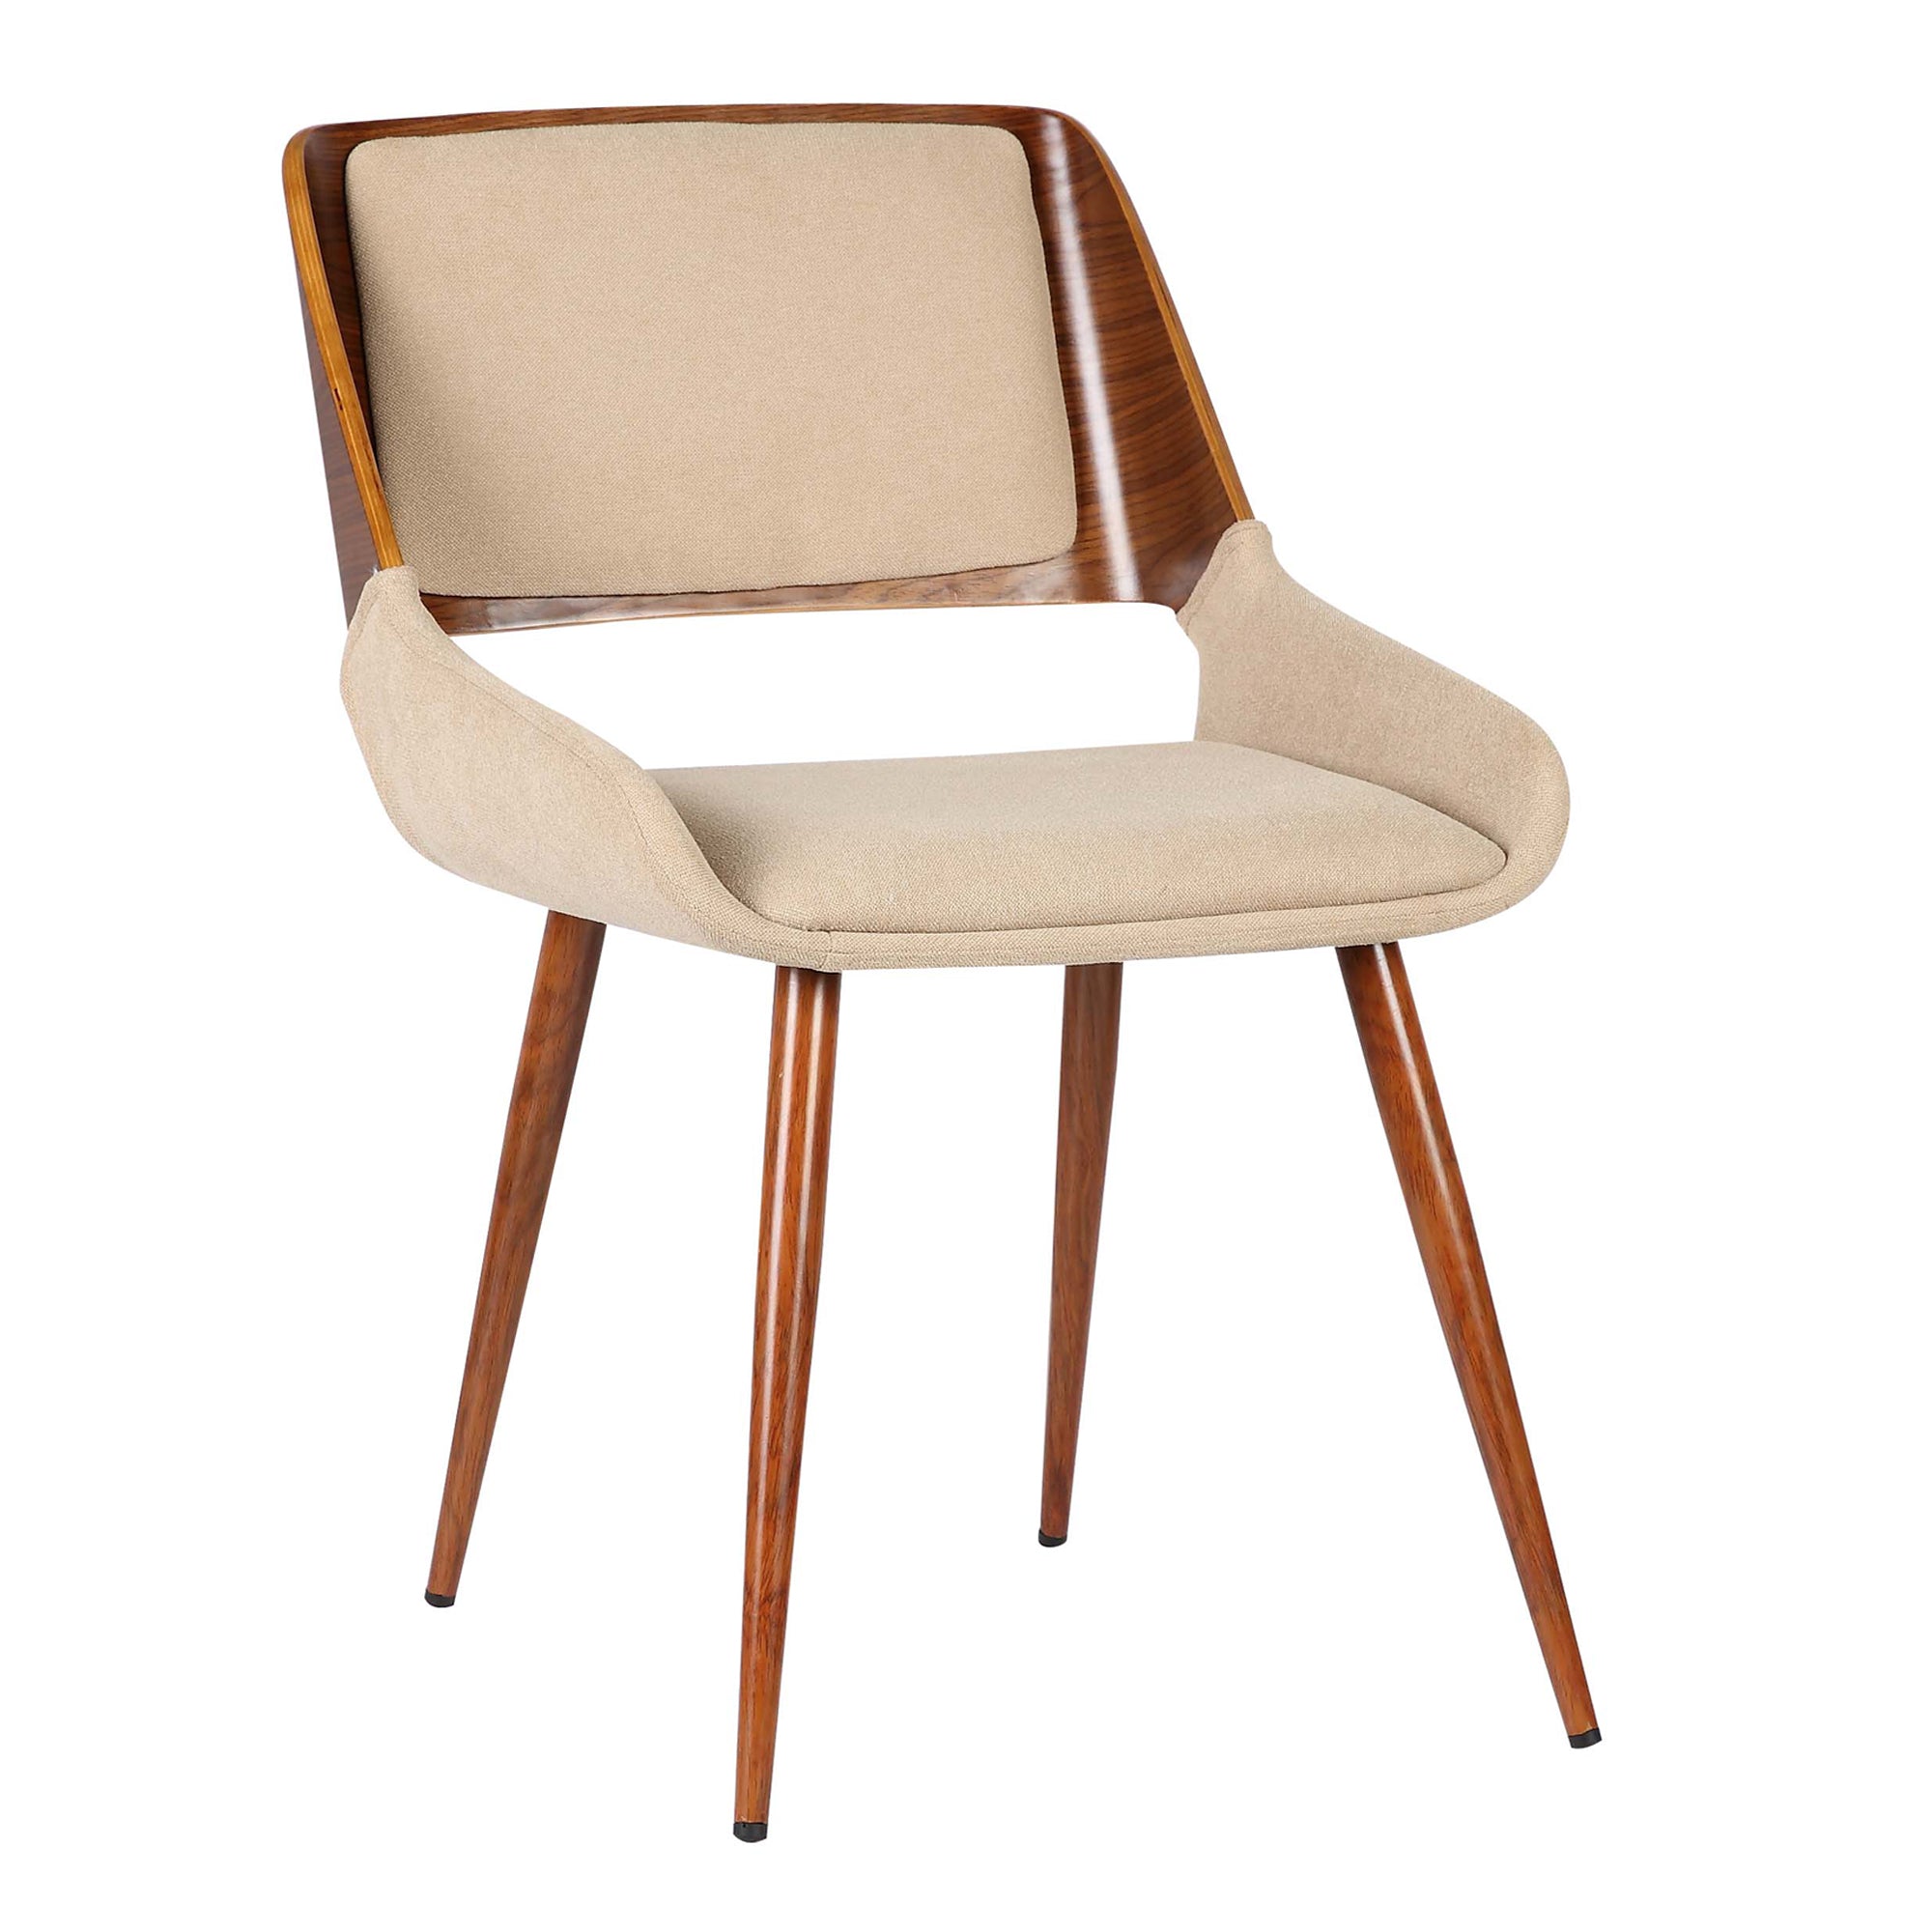 Armen Living Lcpnsiwabr Panda Mid-century Dining Chair In Walnut Finish And Brown Fabric